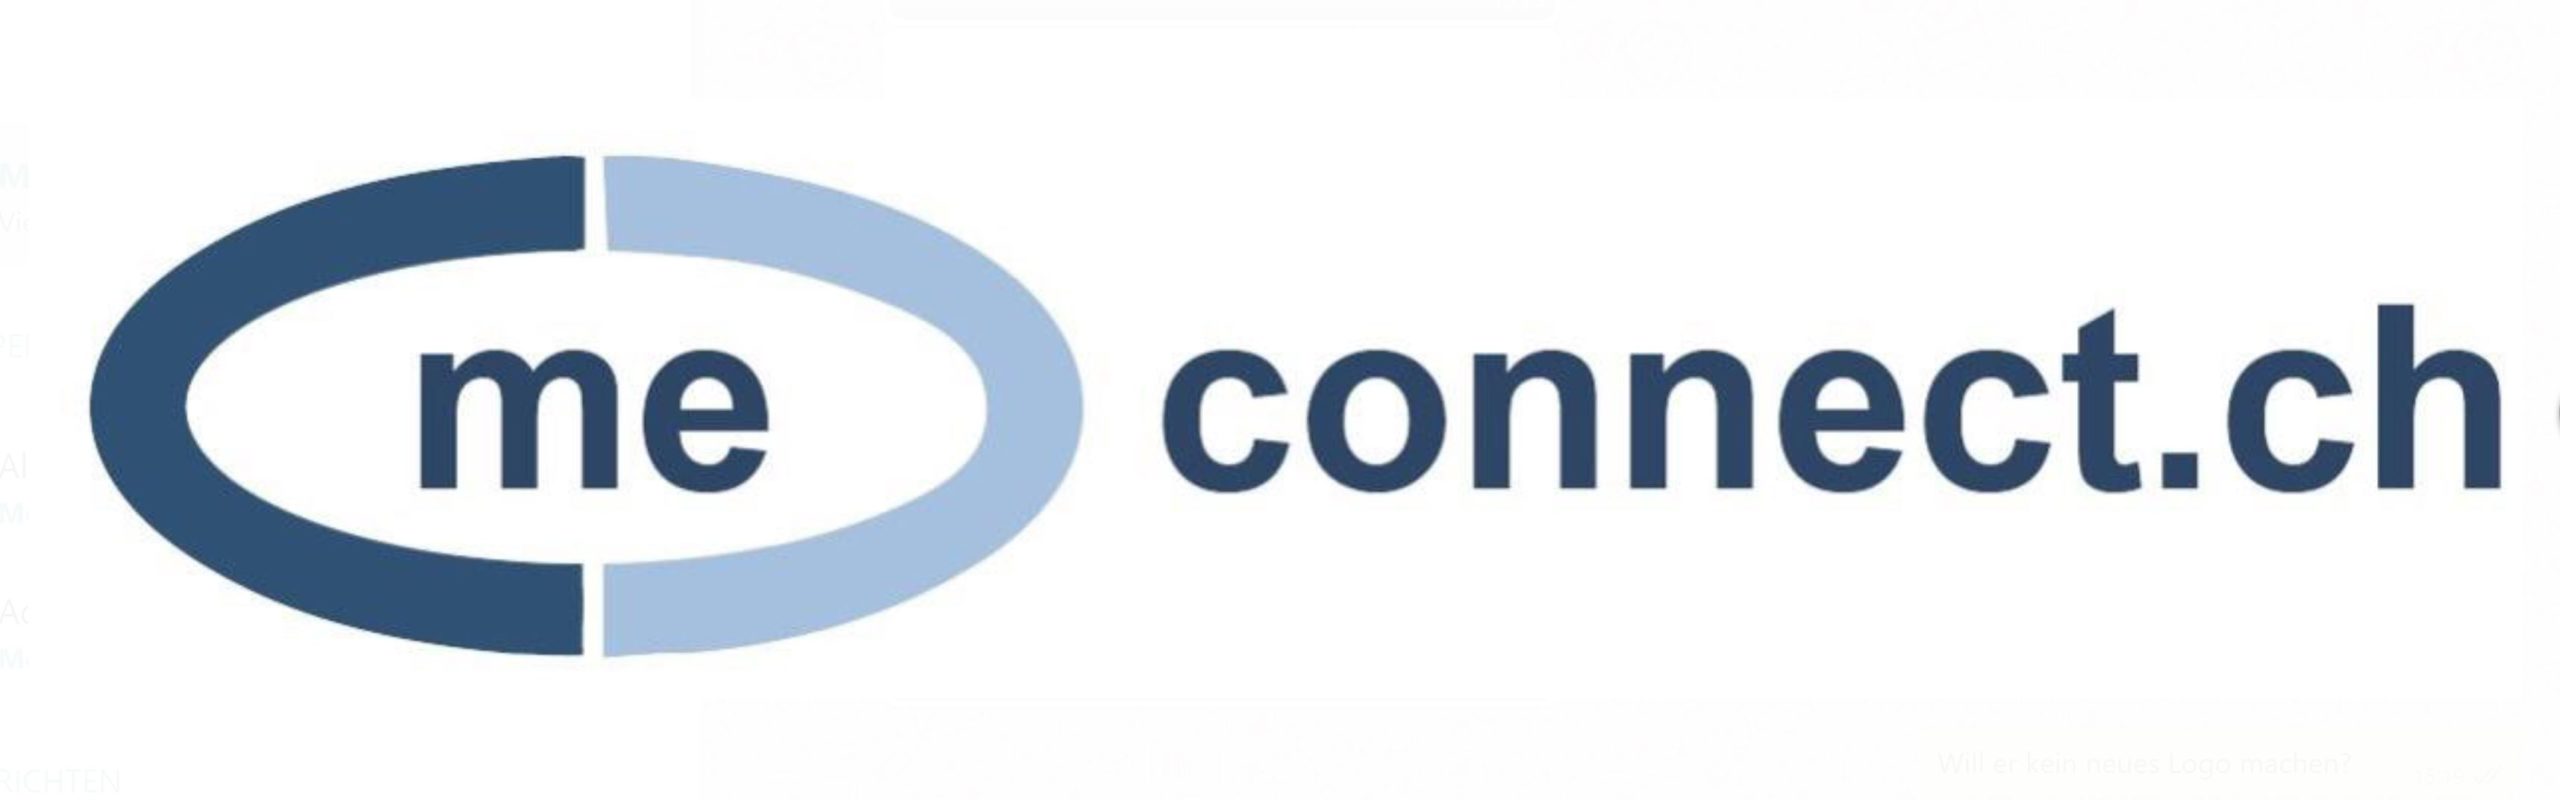 meconnect.ch